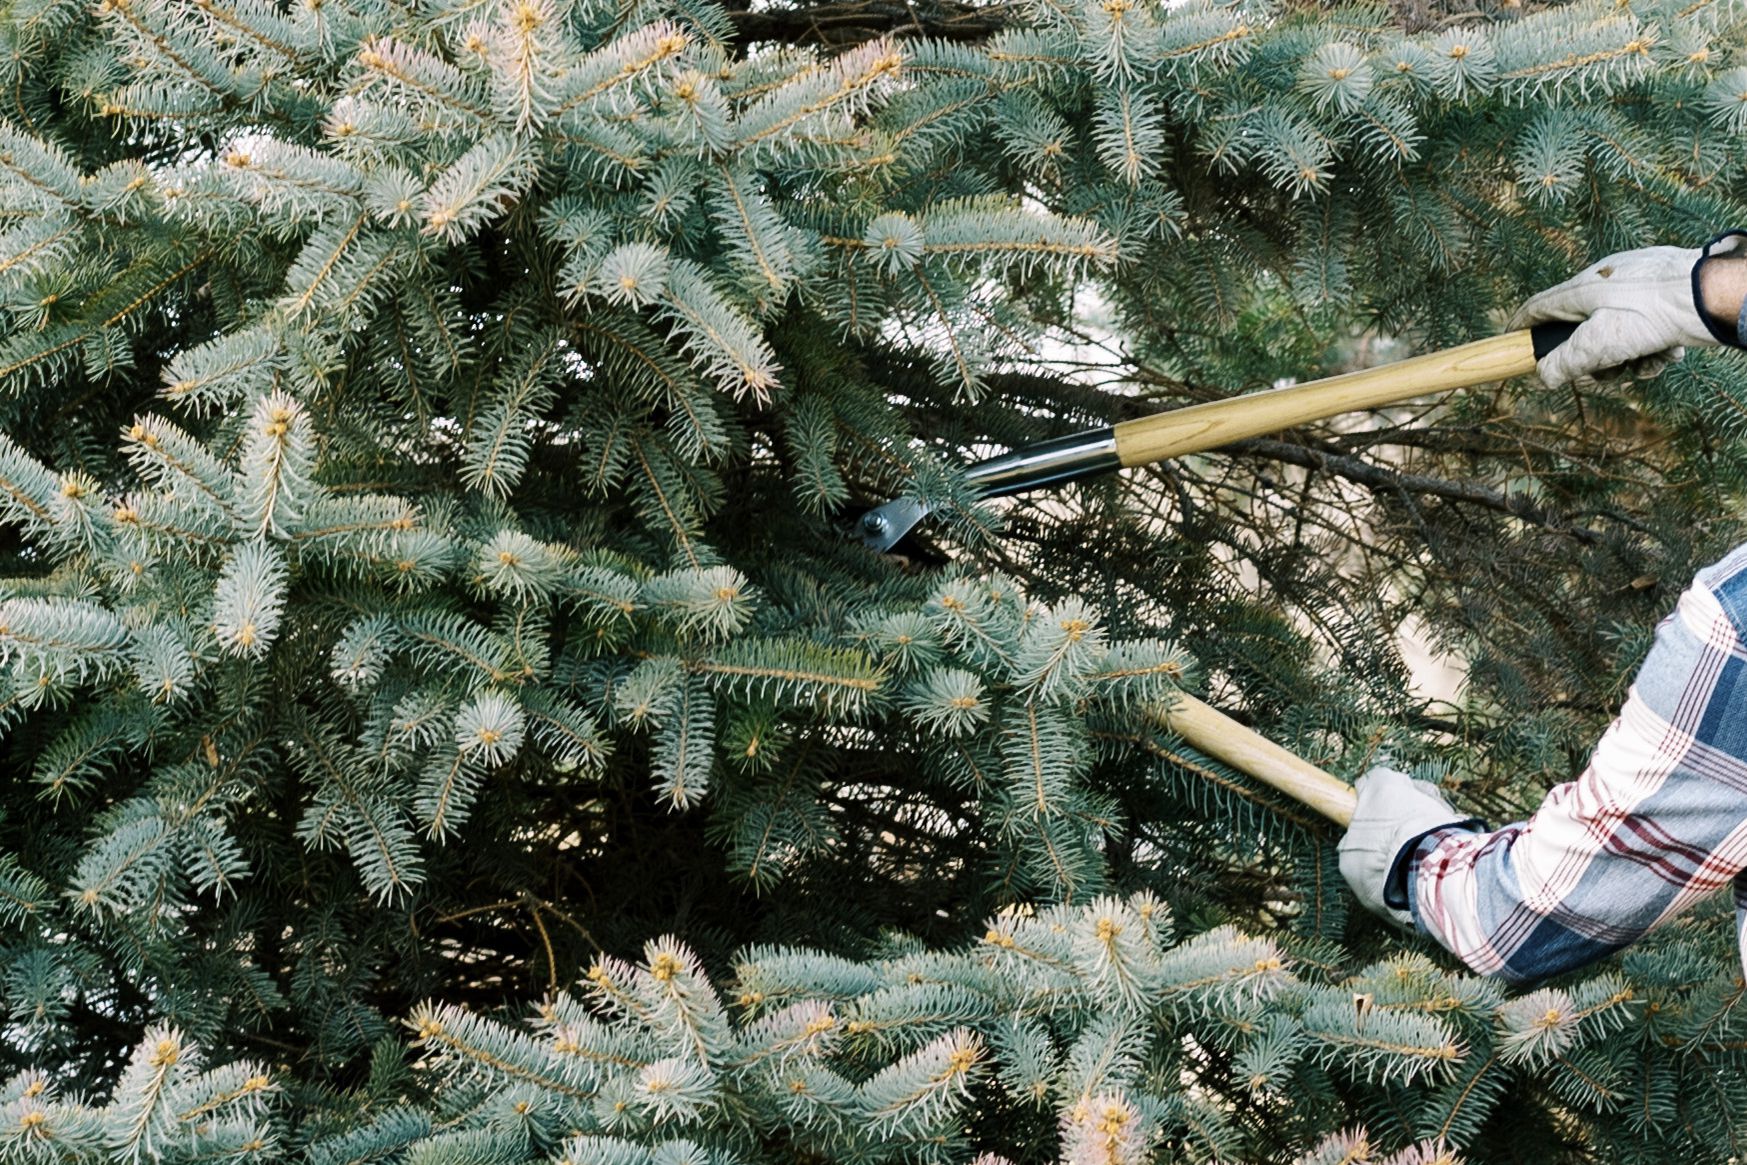 Can You Prune Evergreen Trees?